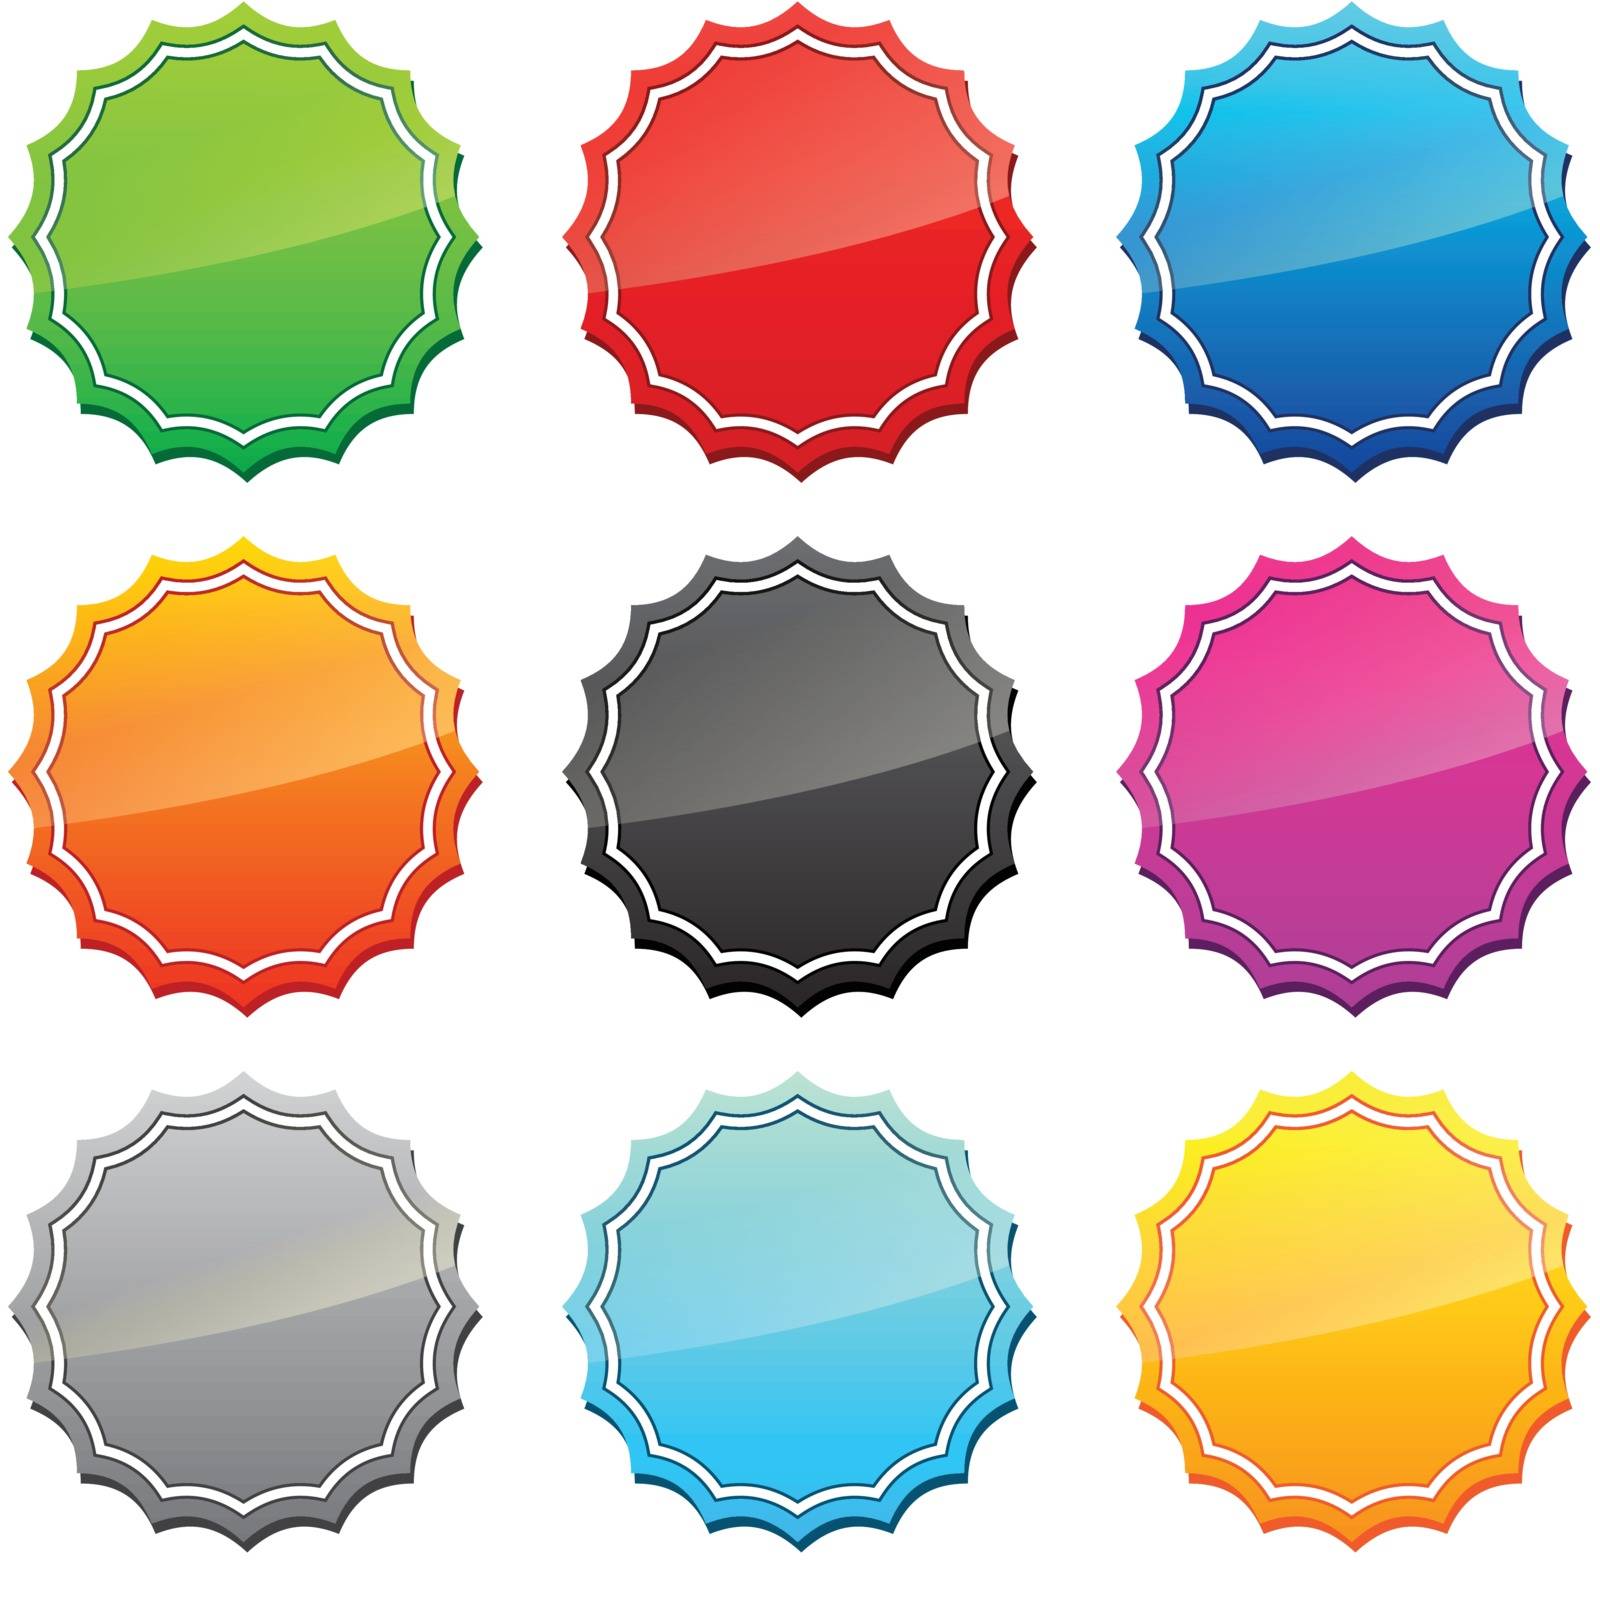 Set of star icons in different colors